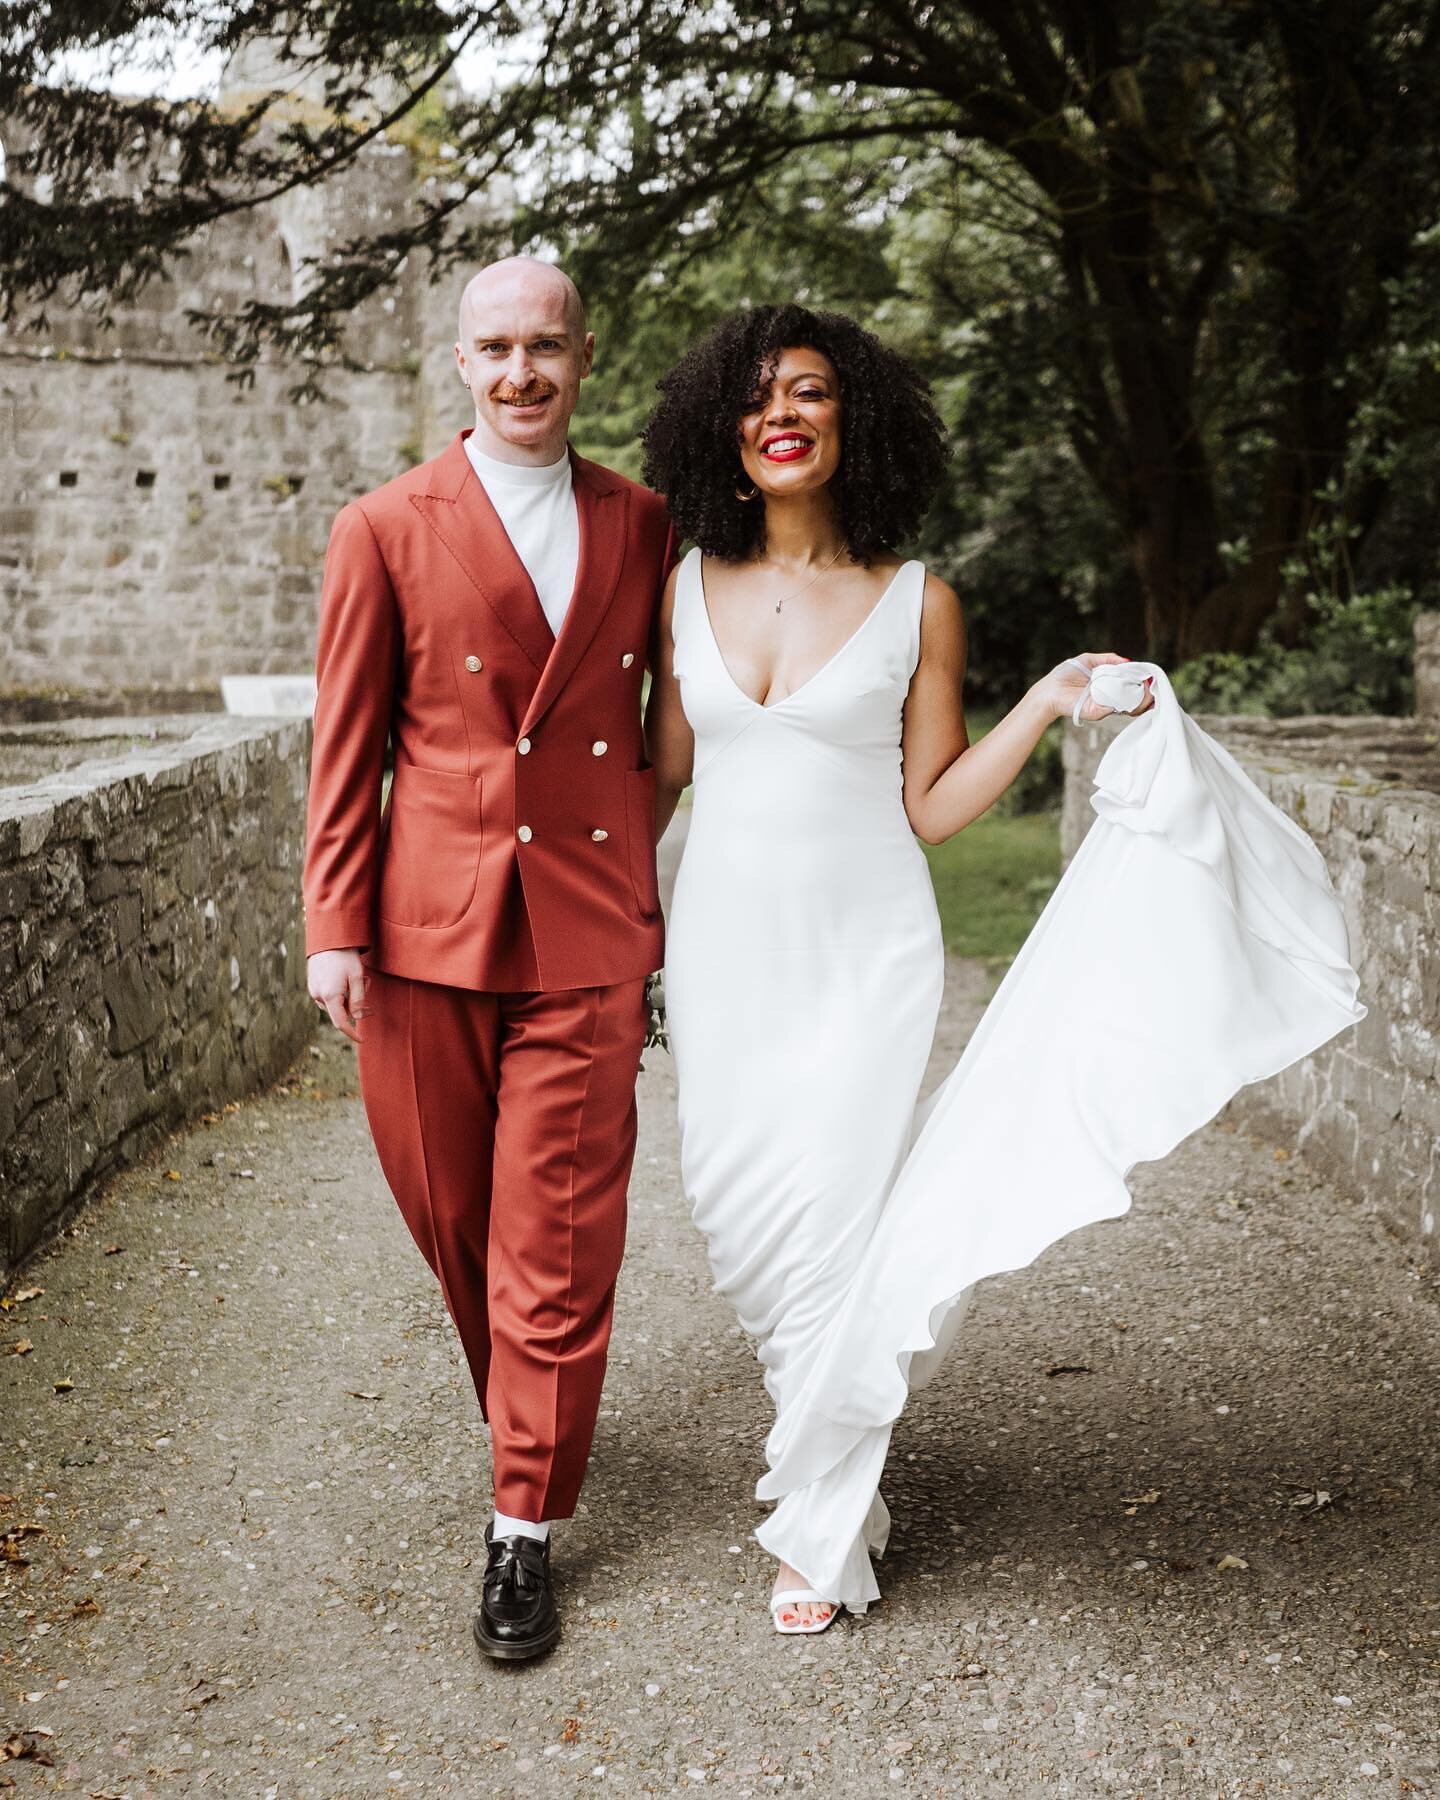 Esther &amp; Liam&rsquo;s wedding was a beautiful mix of traditions from Ireland and Uganda - such a magical celebration of love and culture. &thinsp;
&thinsp;
With an emotional first look at Grey Abbey ruins and a joy-filled ceremony at Orangetree -